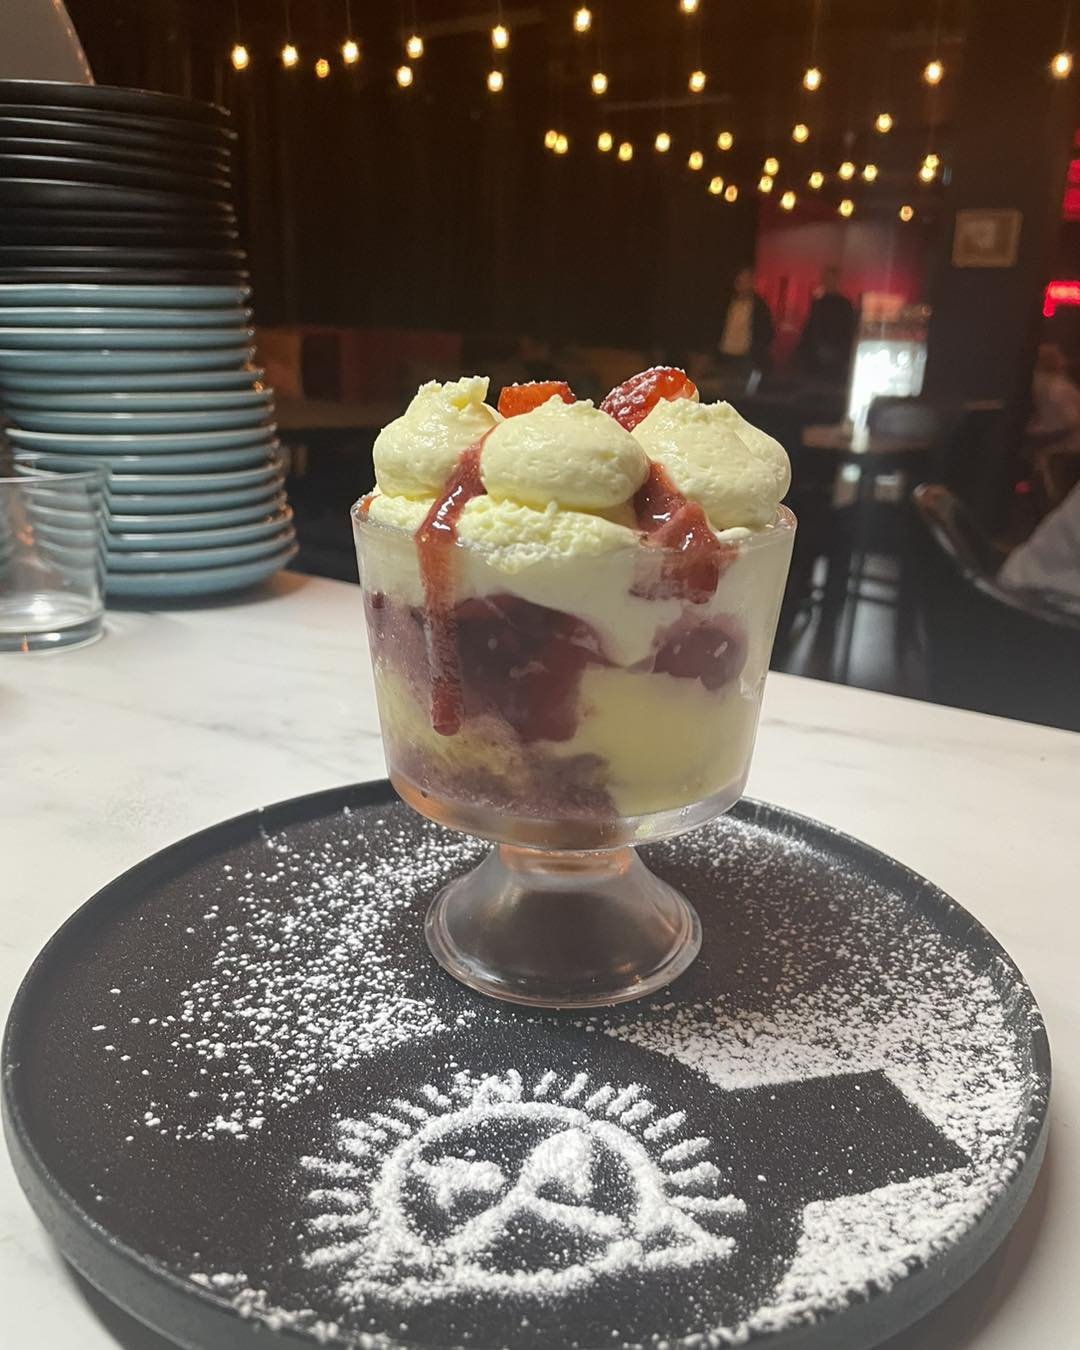 Traditional custard Berry trifle with fresh strawberry compote. 🍓🍓

Open 6pm til 11pm